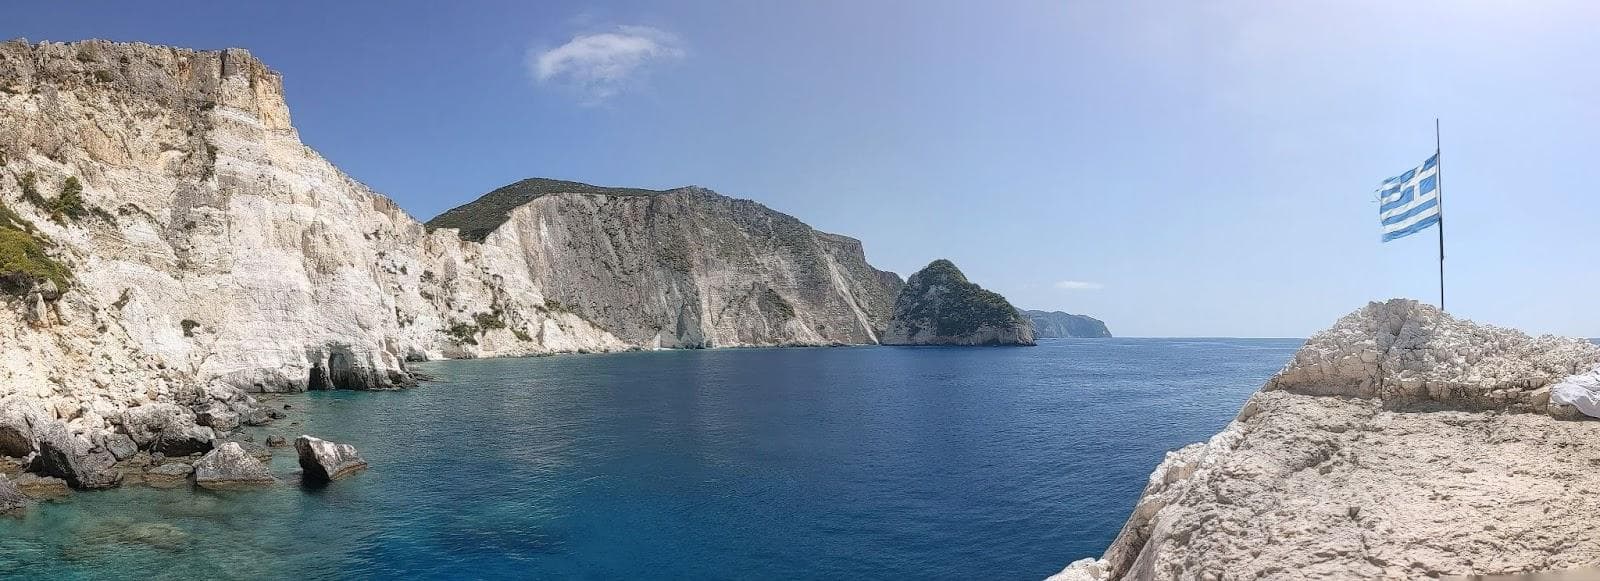 A beach in Greece with cliffs in the background on a sunny day 